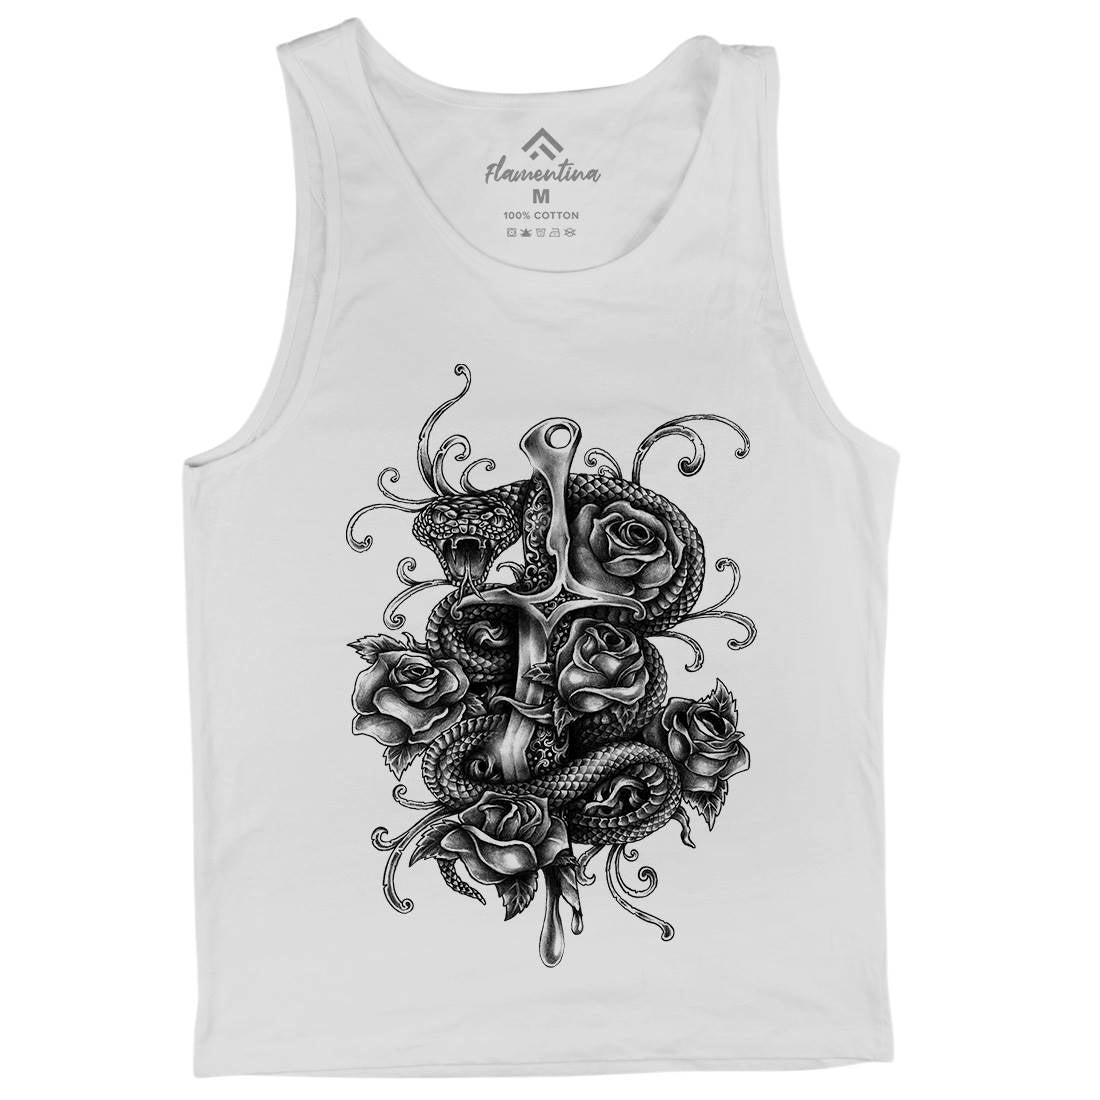 Dagger And Snake Mens Tank Top Vest Tattoo A413